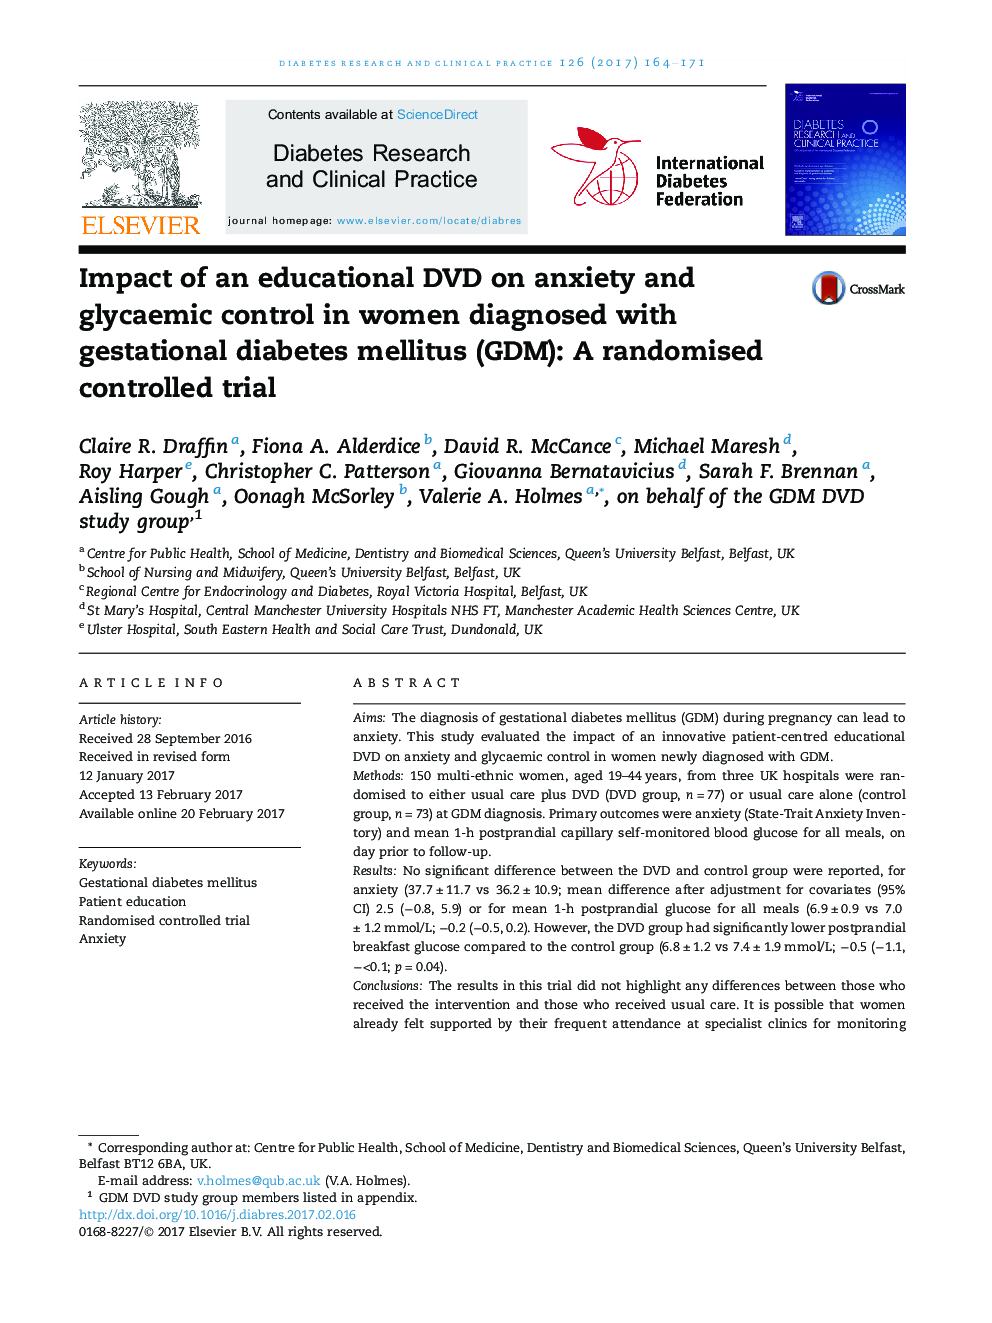 Impact of an educational DVD on anxiety and glycaemic control in women diagnosed with gestational diabetes mellitus (GDM): A randomised controlled trial